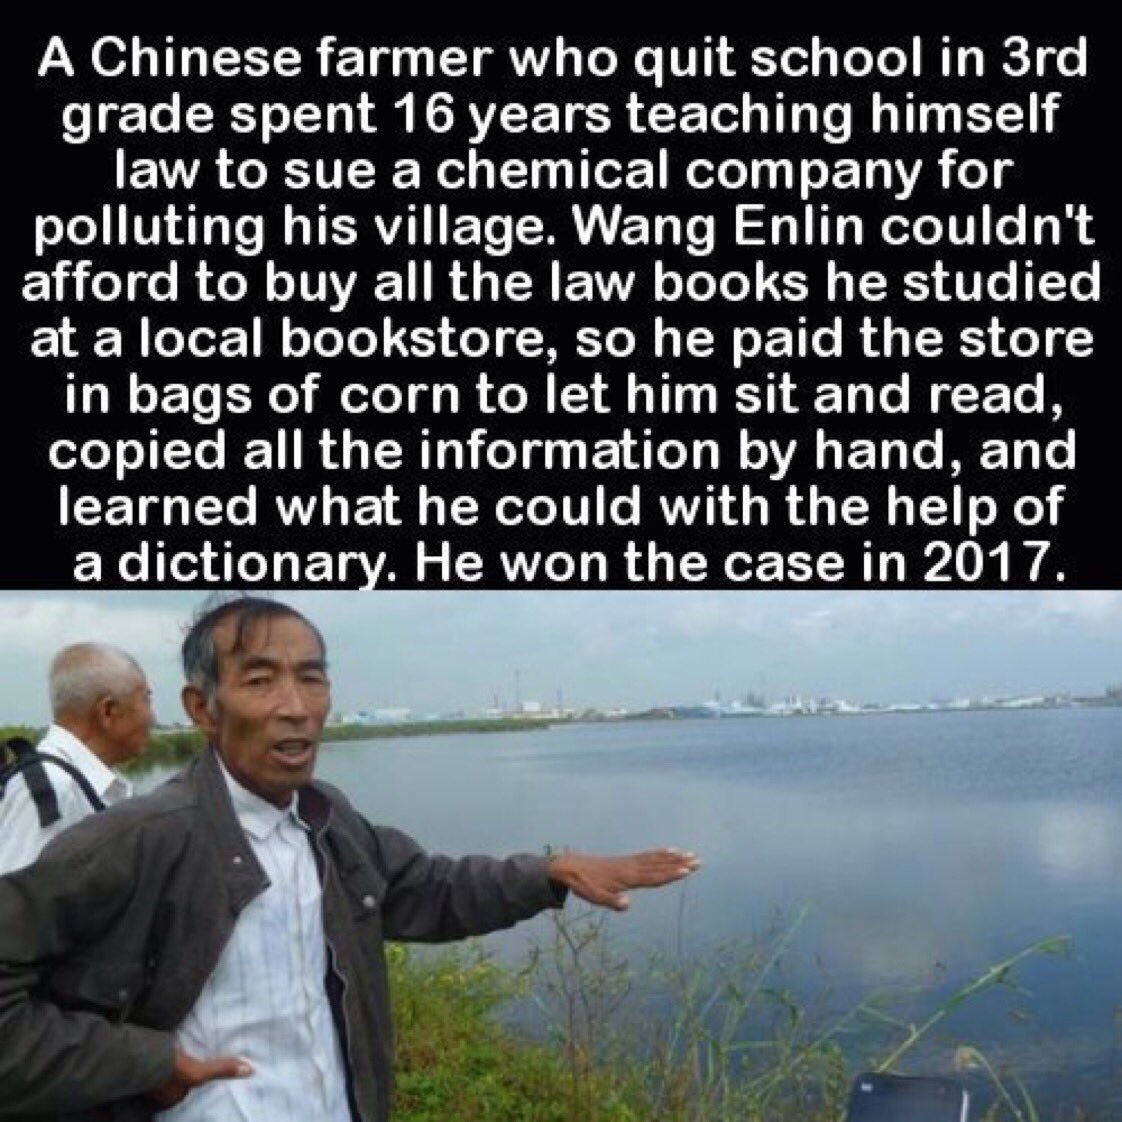 photo caption - A Chinese farmer who quit school in 3rd grade spent 16 years teaching himself law to sue a chemical company for polluting his village. Wang Enlin couldn't afford to buy all the law books he studied at a local bookstore, so he paid the stor